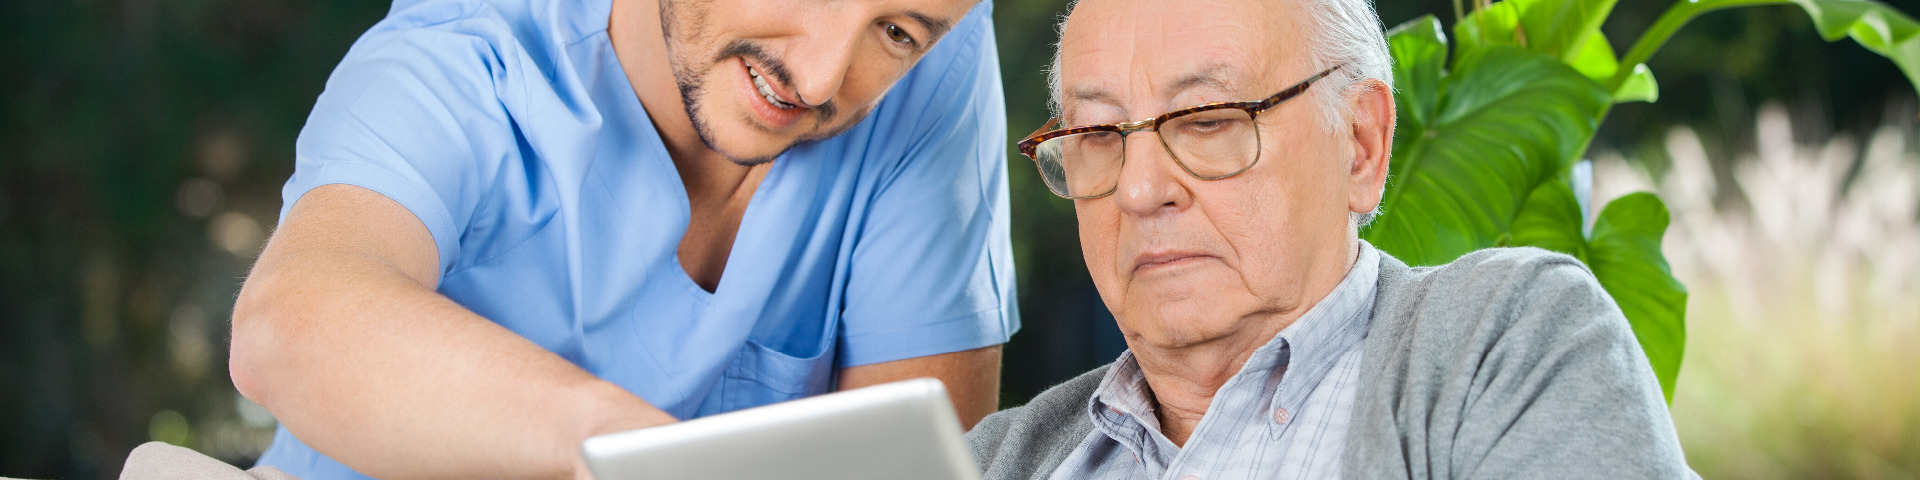 Healthcare worker supporting elderly person with making decisions about their care